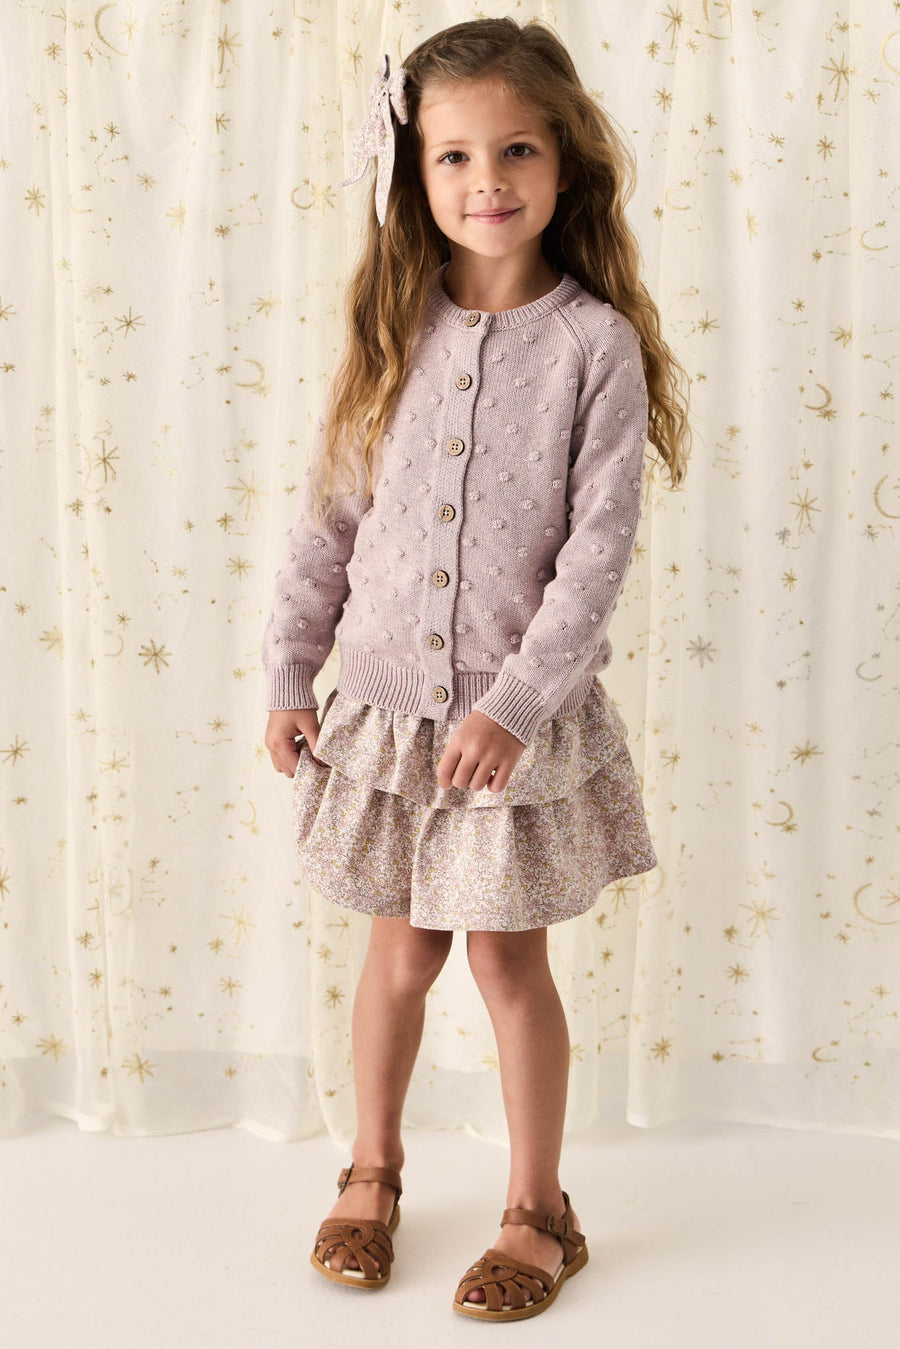 Simple Dotty Cardigan - Violet Marle Childrens Cardigan from Jamie Kay USA